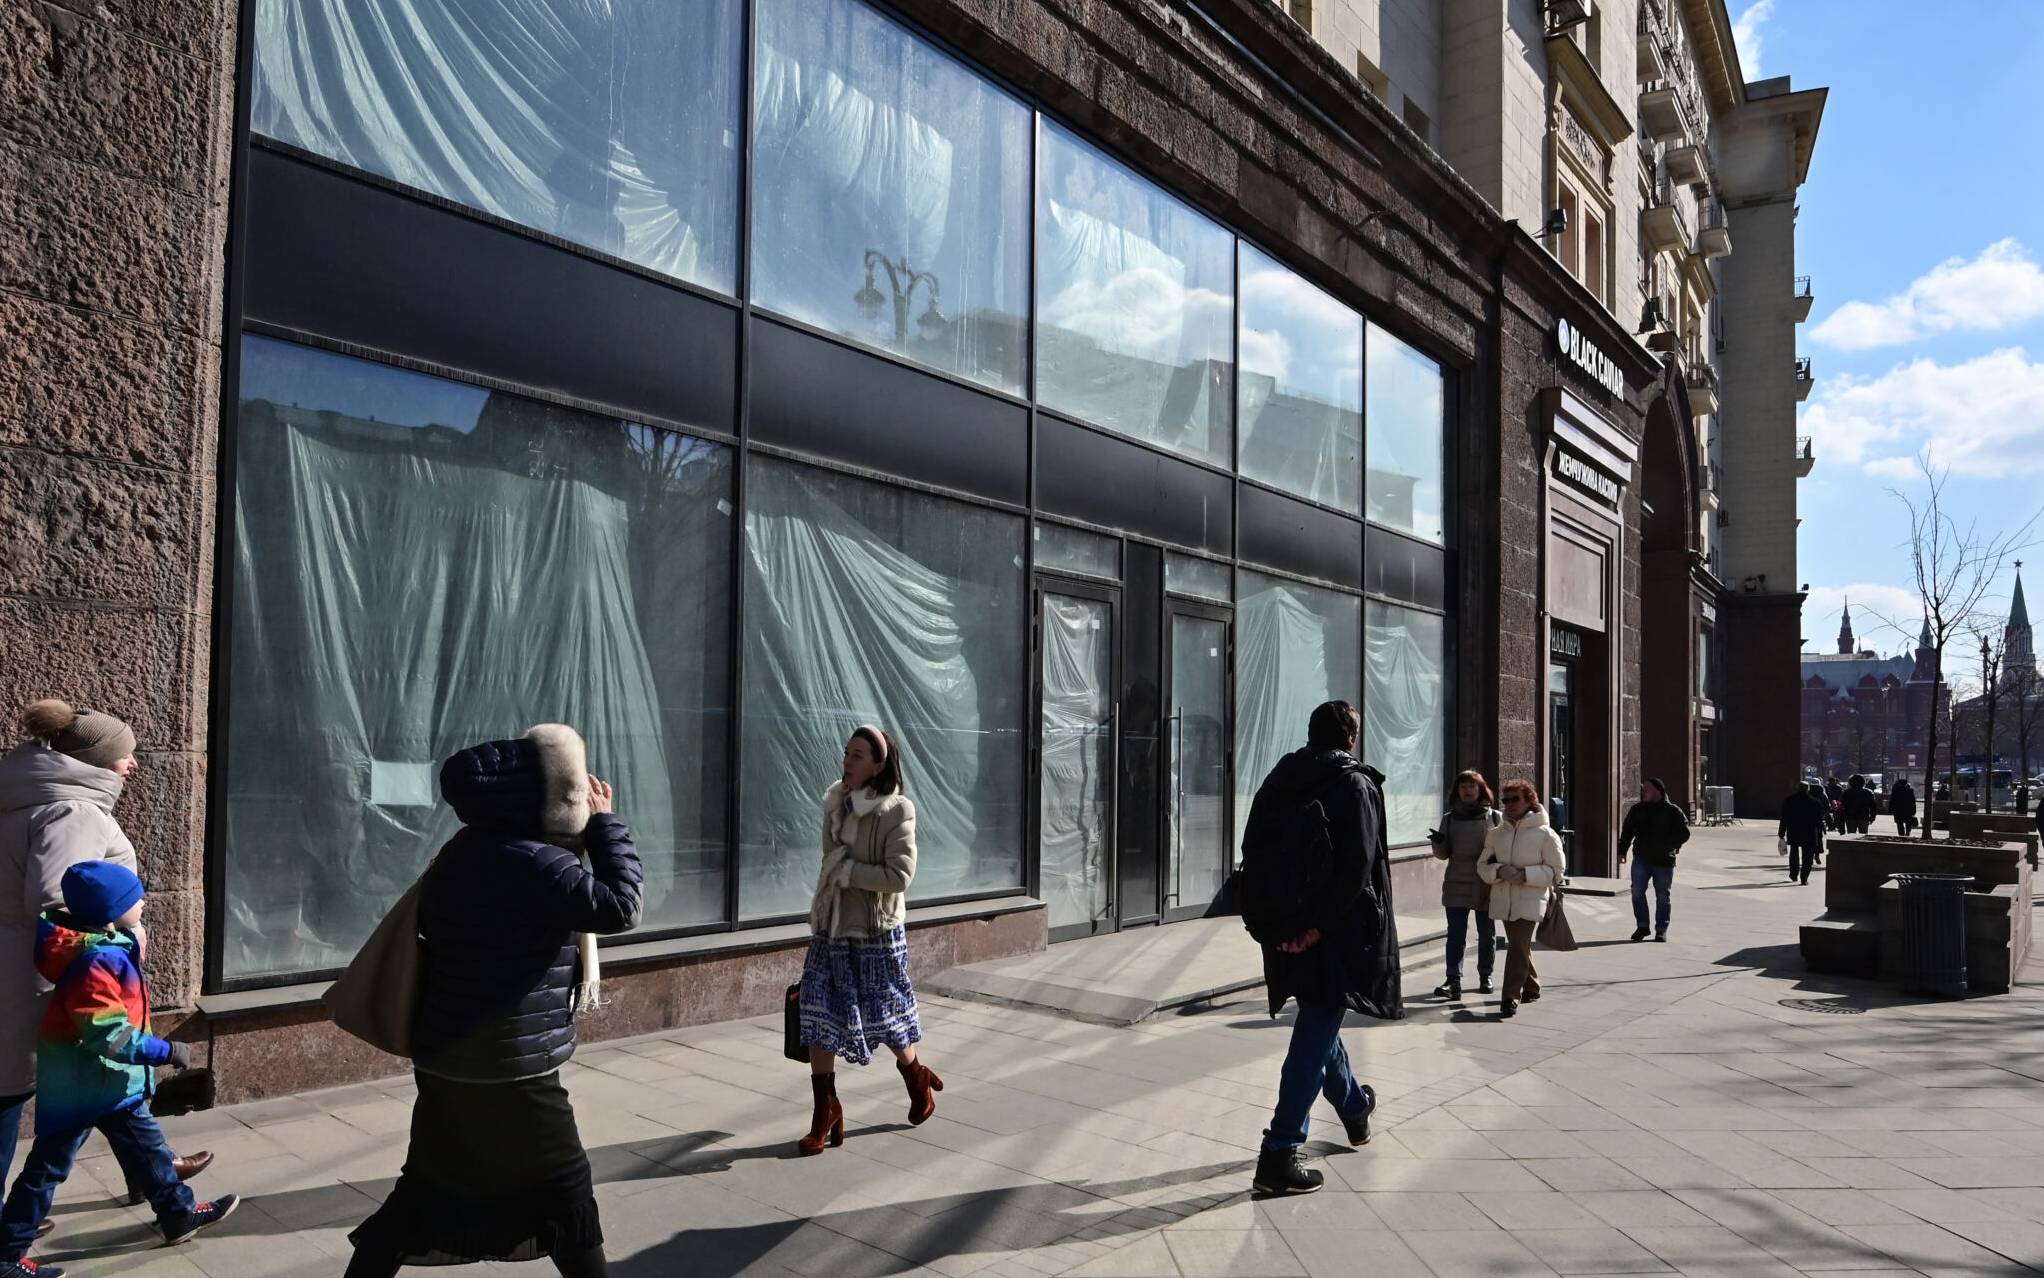 People walk past empty retail space on Tverskaya street in central Moscow on March 16, 2022. - On February 24, Putin ordered Russian troops to pour into pro-Western Ukraine, triggering unprecedented Western sanctions against Moscow and sparking an exodus of foreign corporations including H&amp;M, McDonald's and Ikea. (Photo by - / AFP)